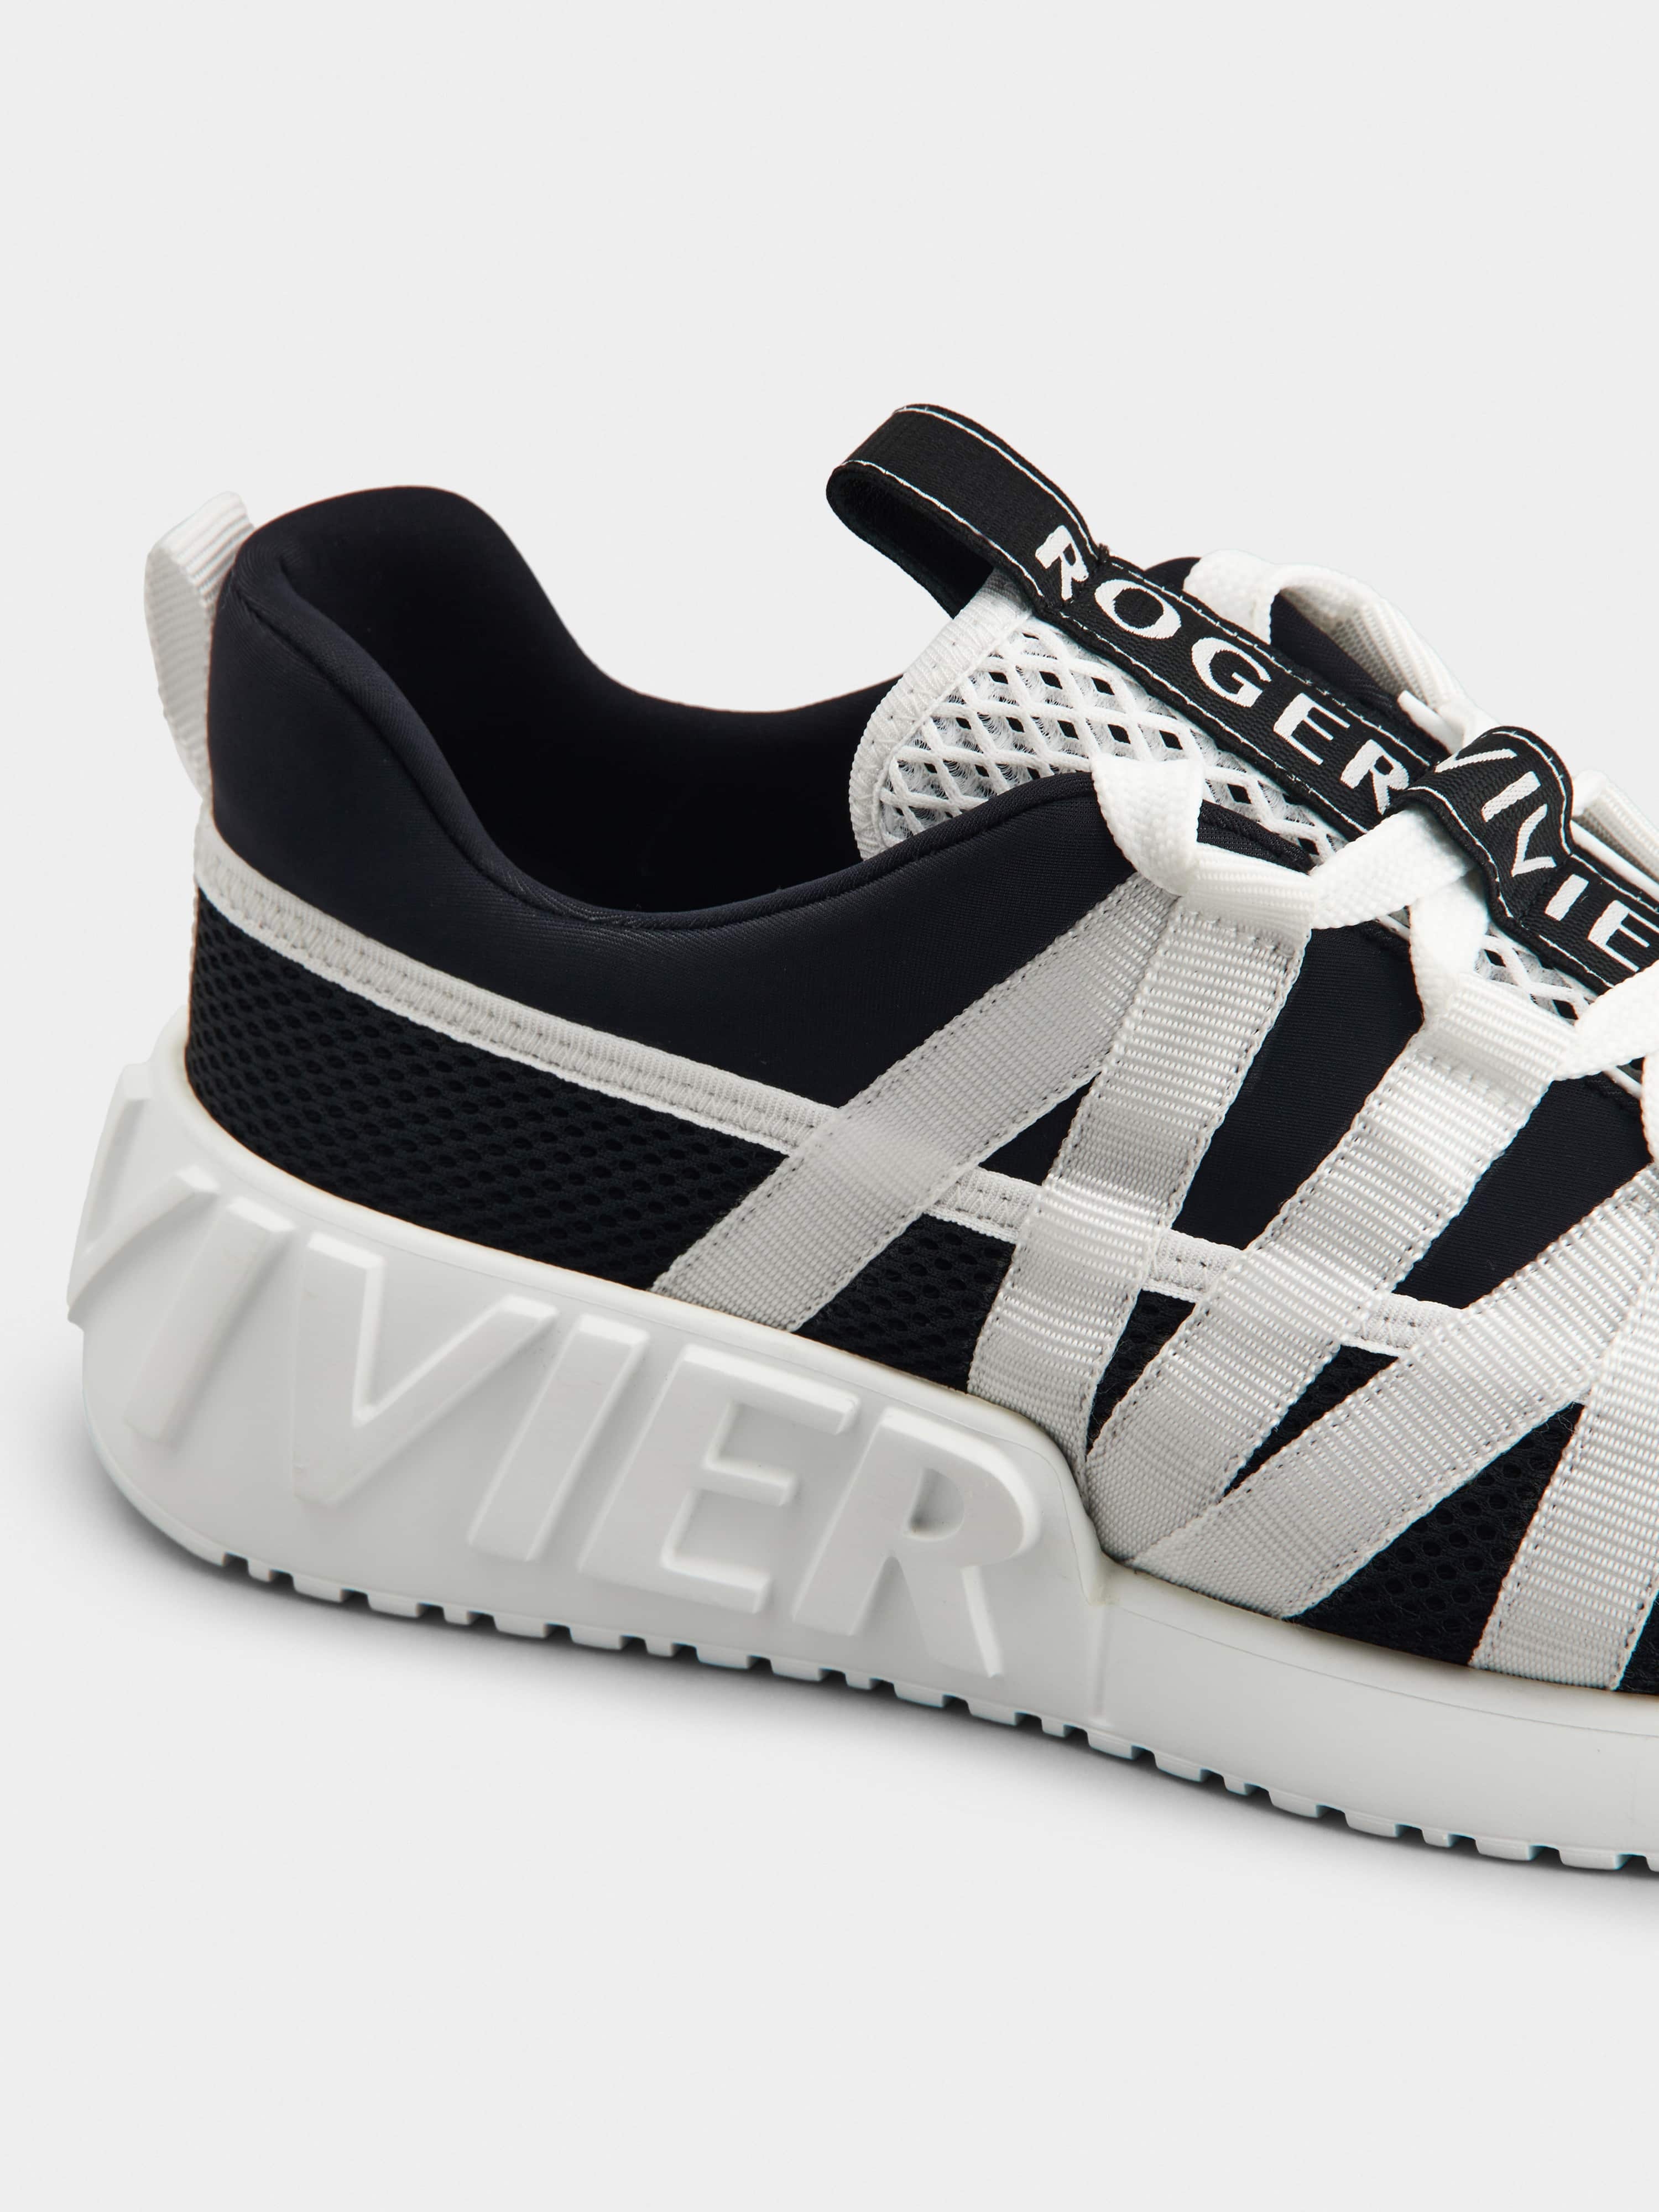 Viv' Go Lace Up Sneakers in Technical Fabrics - 8